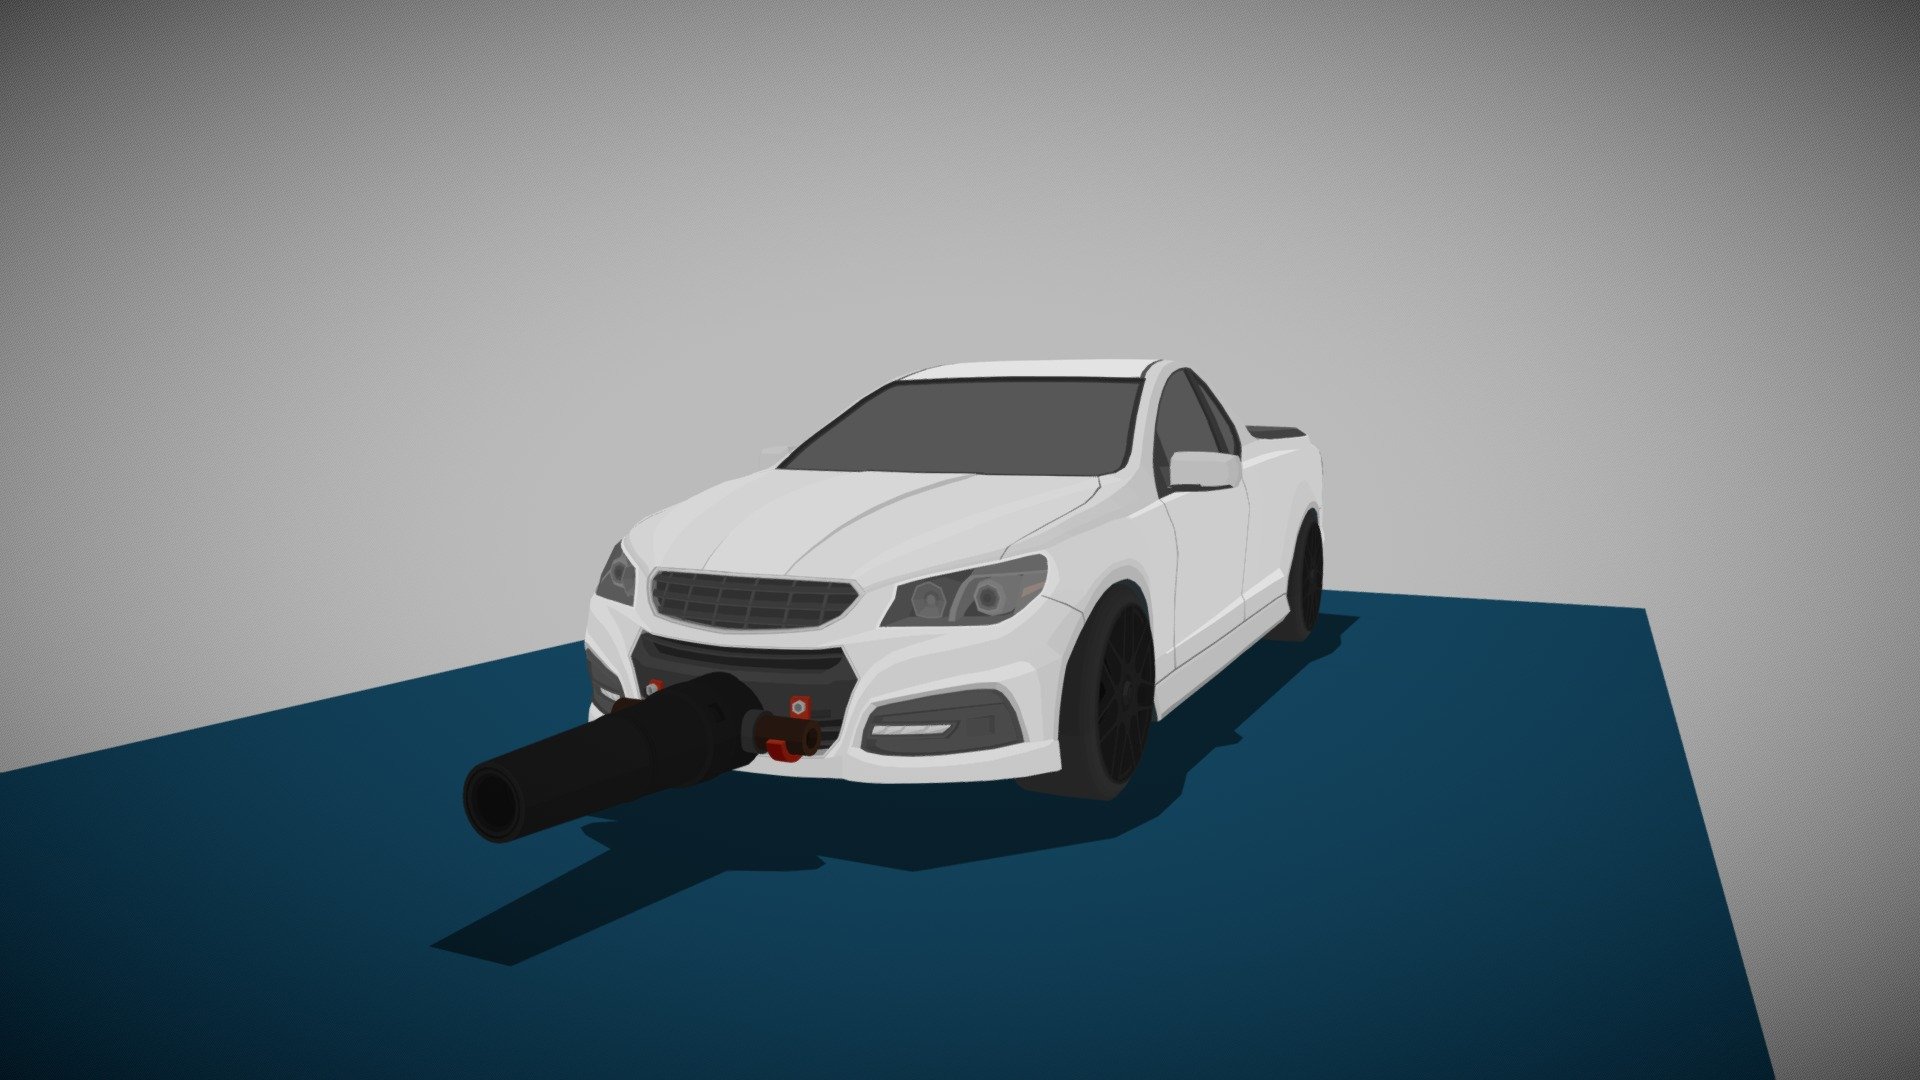 Hi all!
This was my last order for a special customer. He needed a car for the game he is developing. He requested me to create a car inspired to an Holden Ute with a cannon mounted on its front.
Enjoy! - Holden Ute (low poly) - 3D model by IvOfficial 3d model